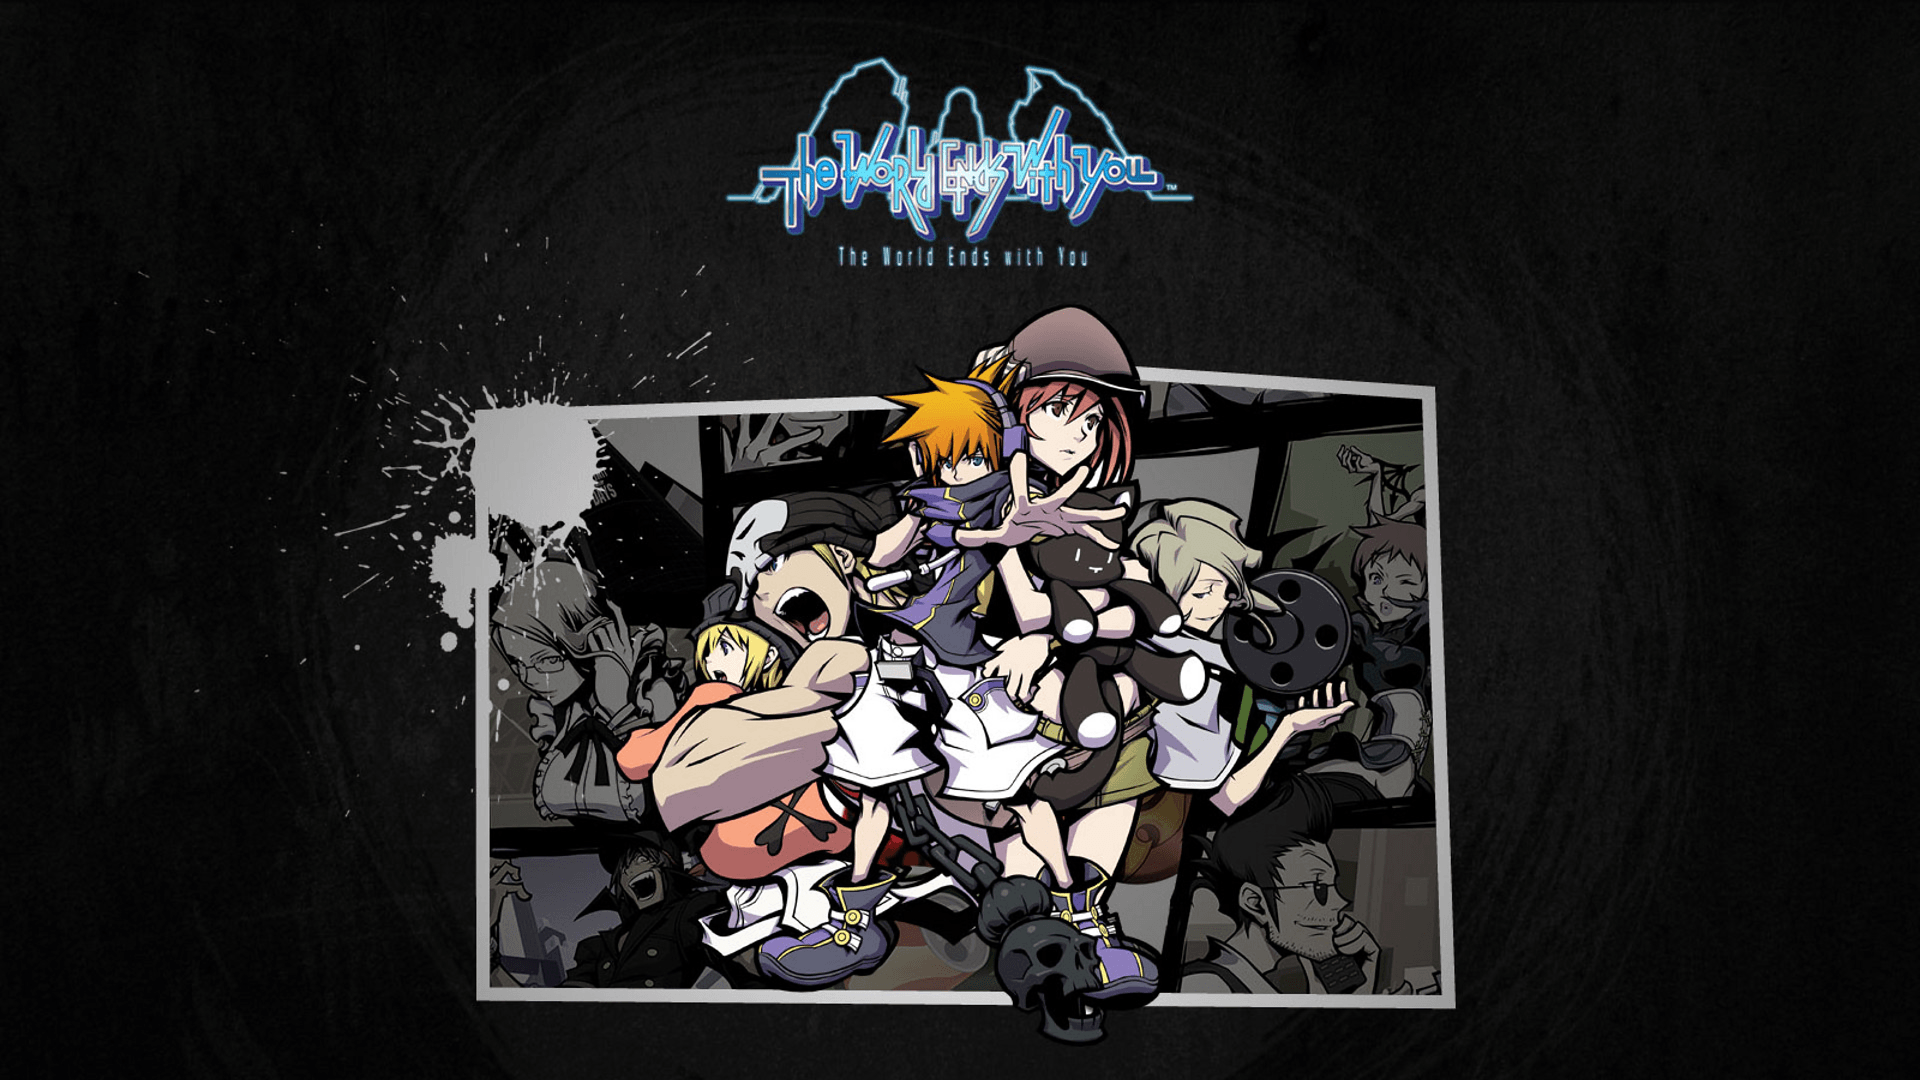 The World Ends With You HD Wallpaper. Background Imagex1080